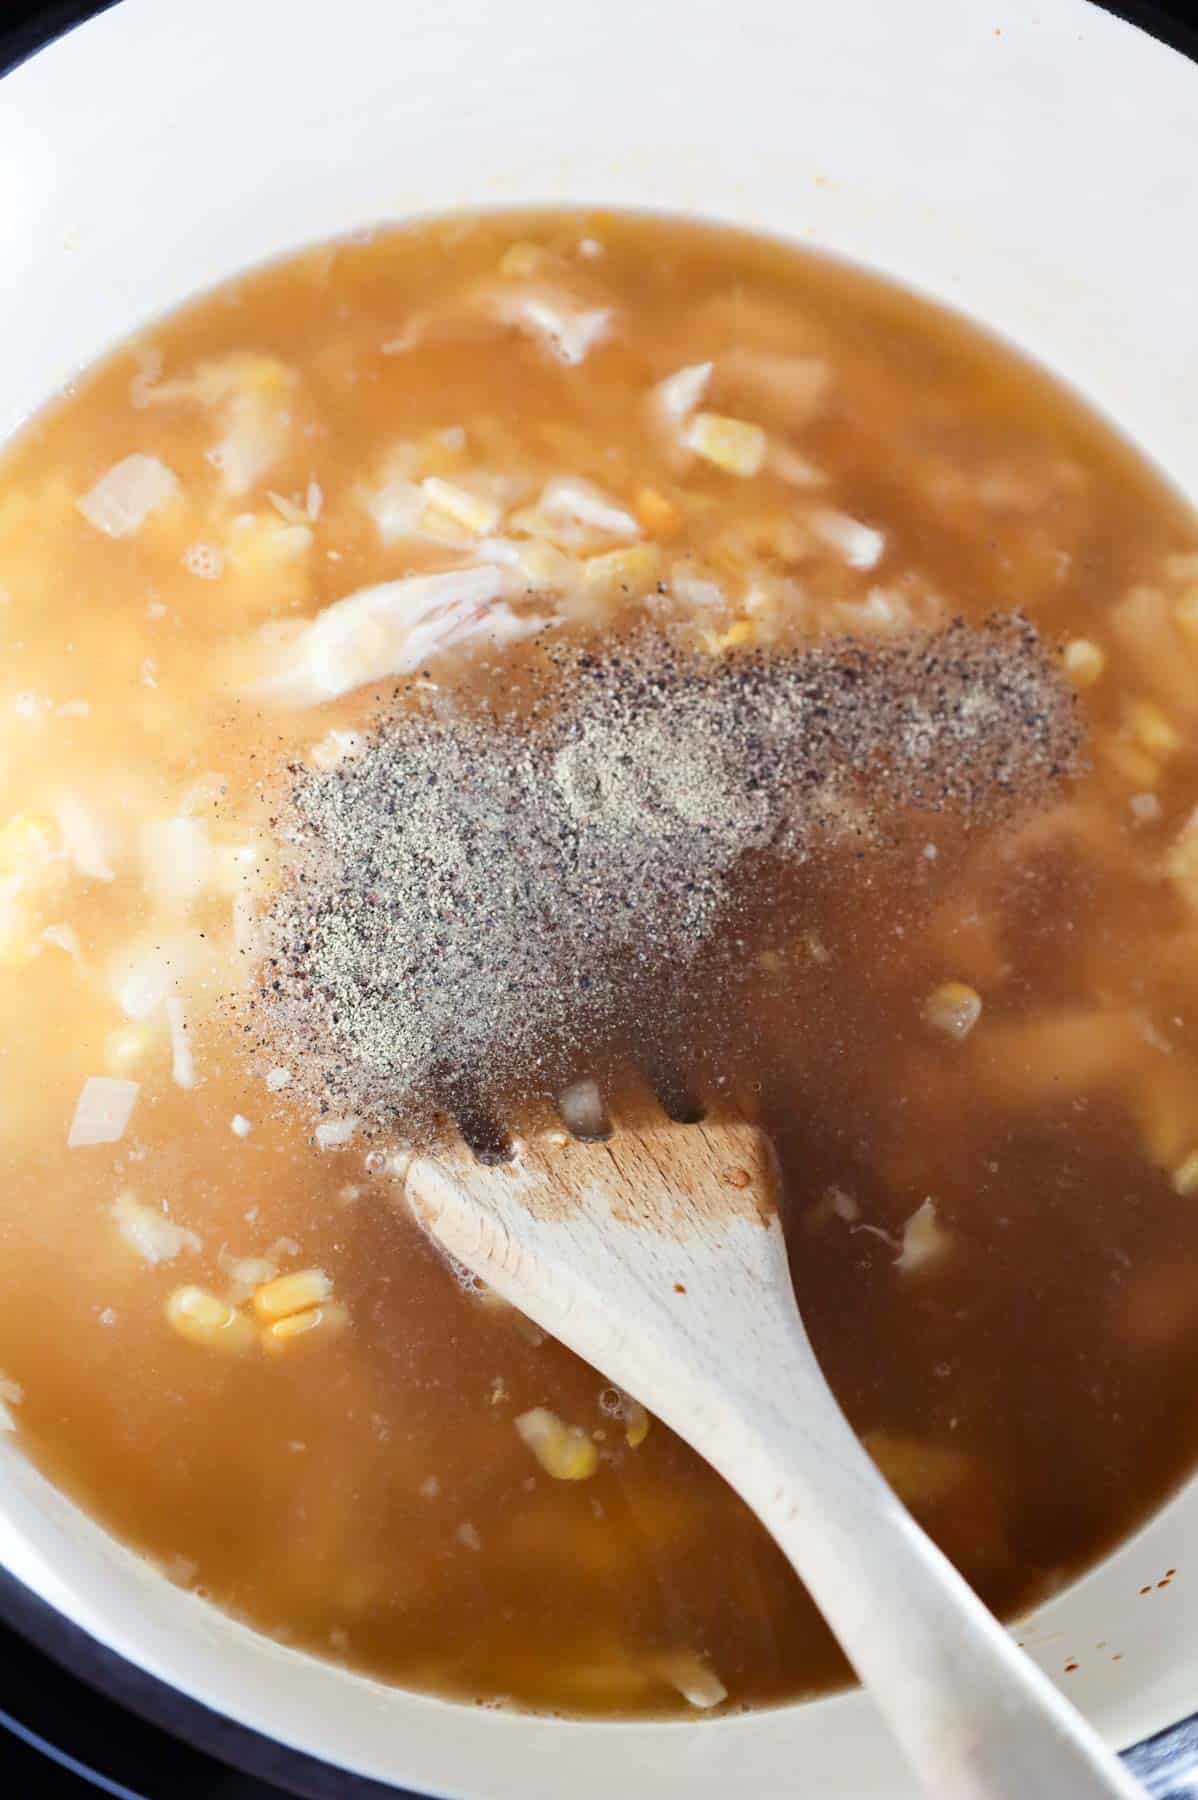 soy sauce and pepper added to sweet corn soup